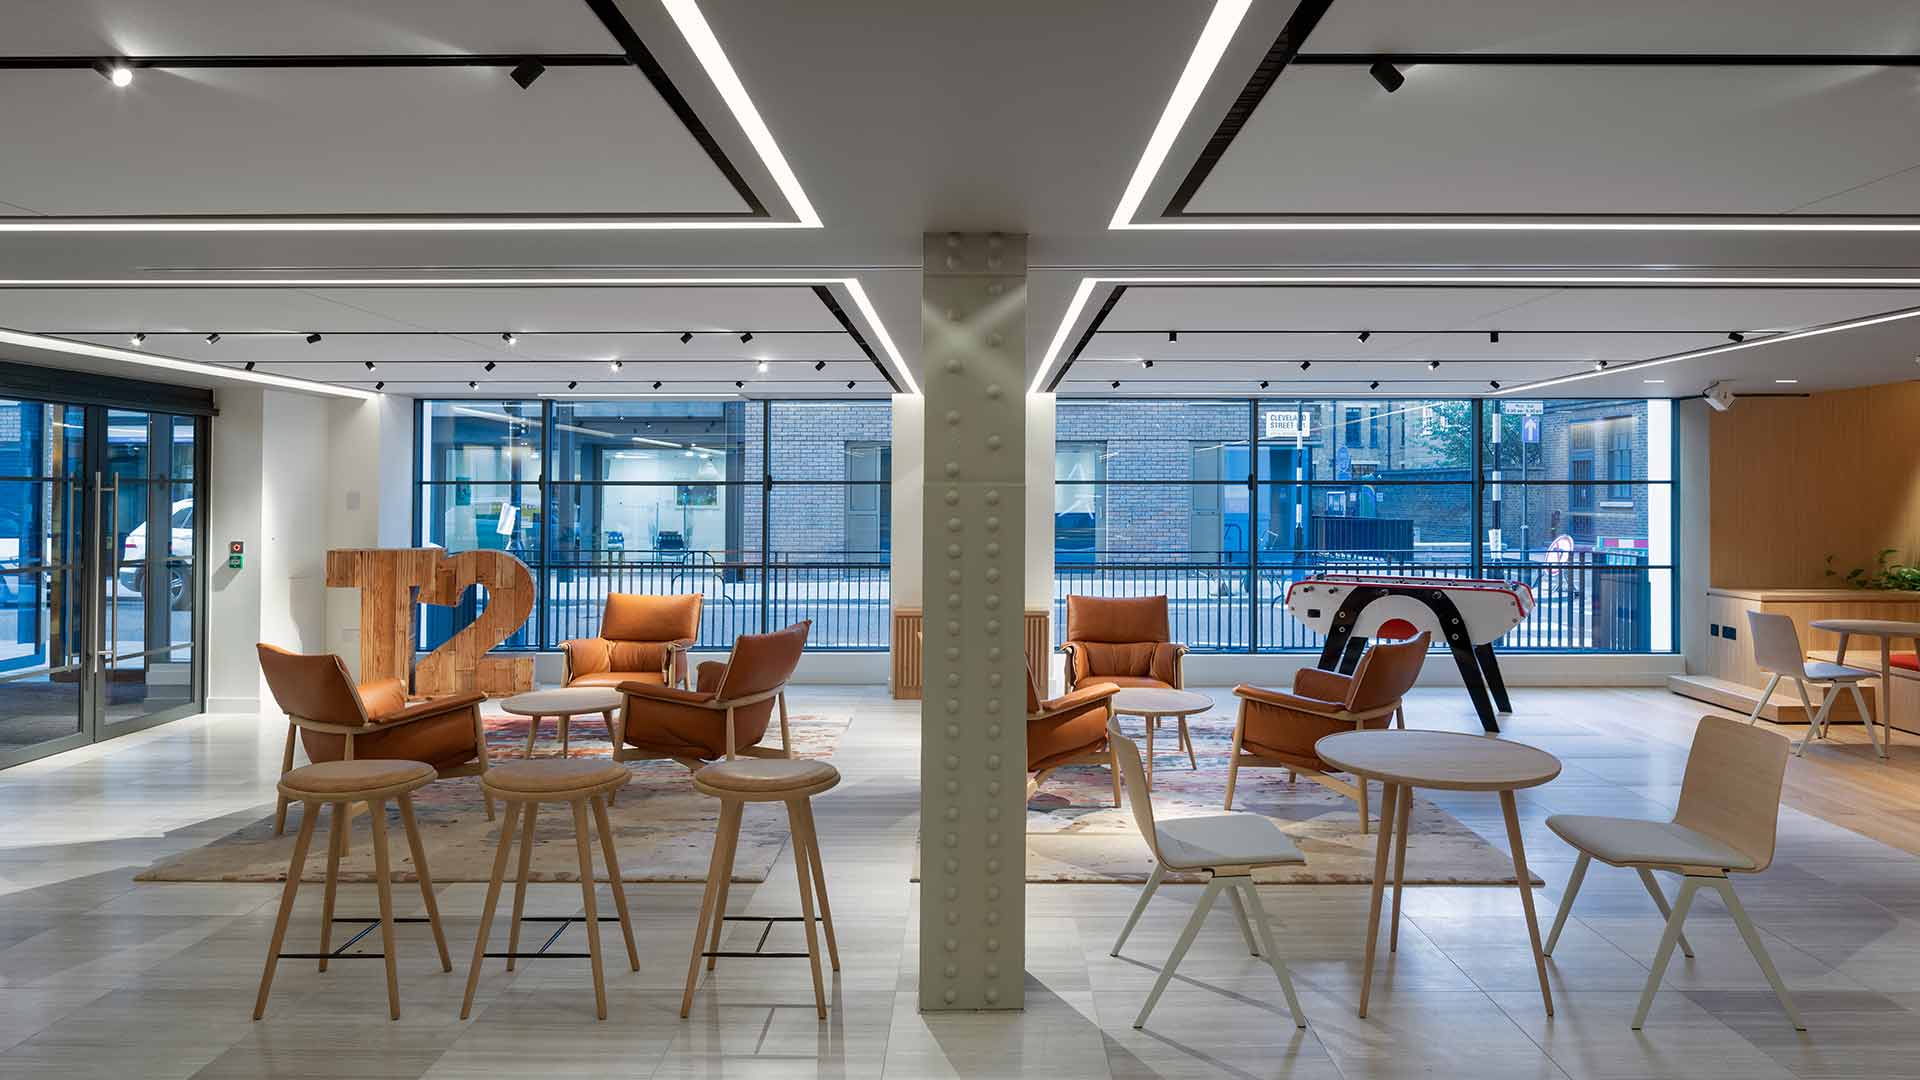 London Office Breakout Townhall Space Recessed Linear Lighting Illuminating Welcoming Workspace Interior Lighting Designers Nulty